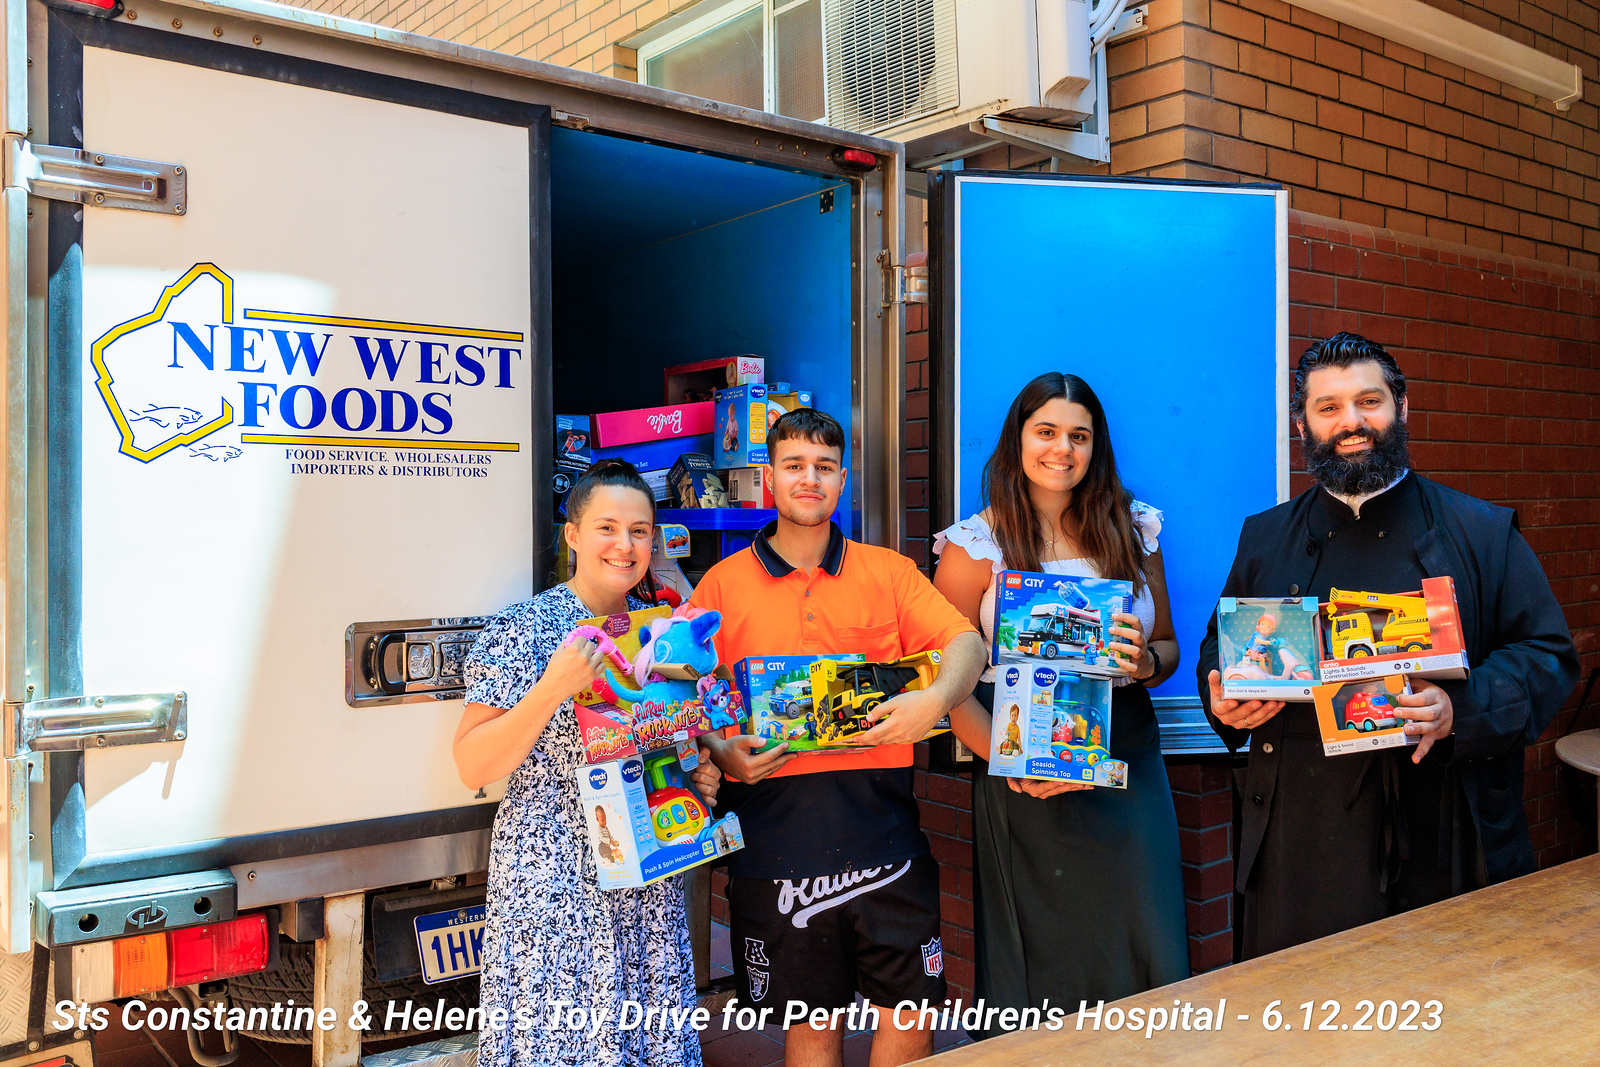 Perth: 515 toys donated to Perth Children’s Hospital